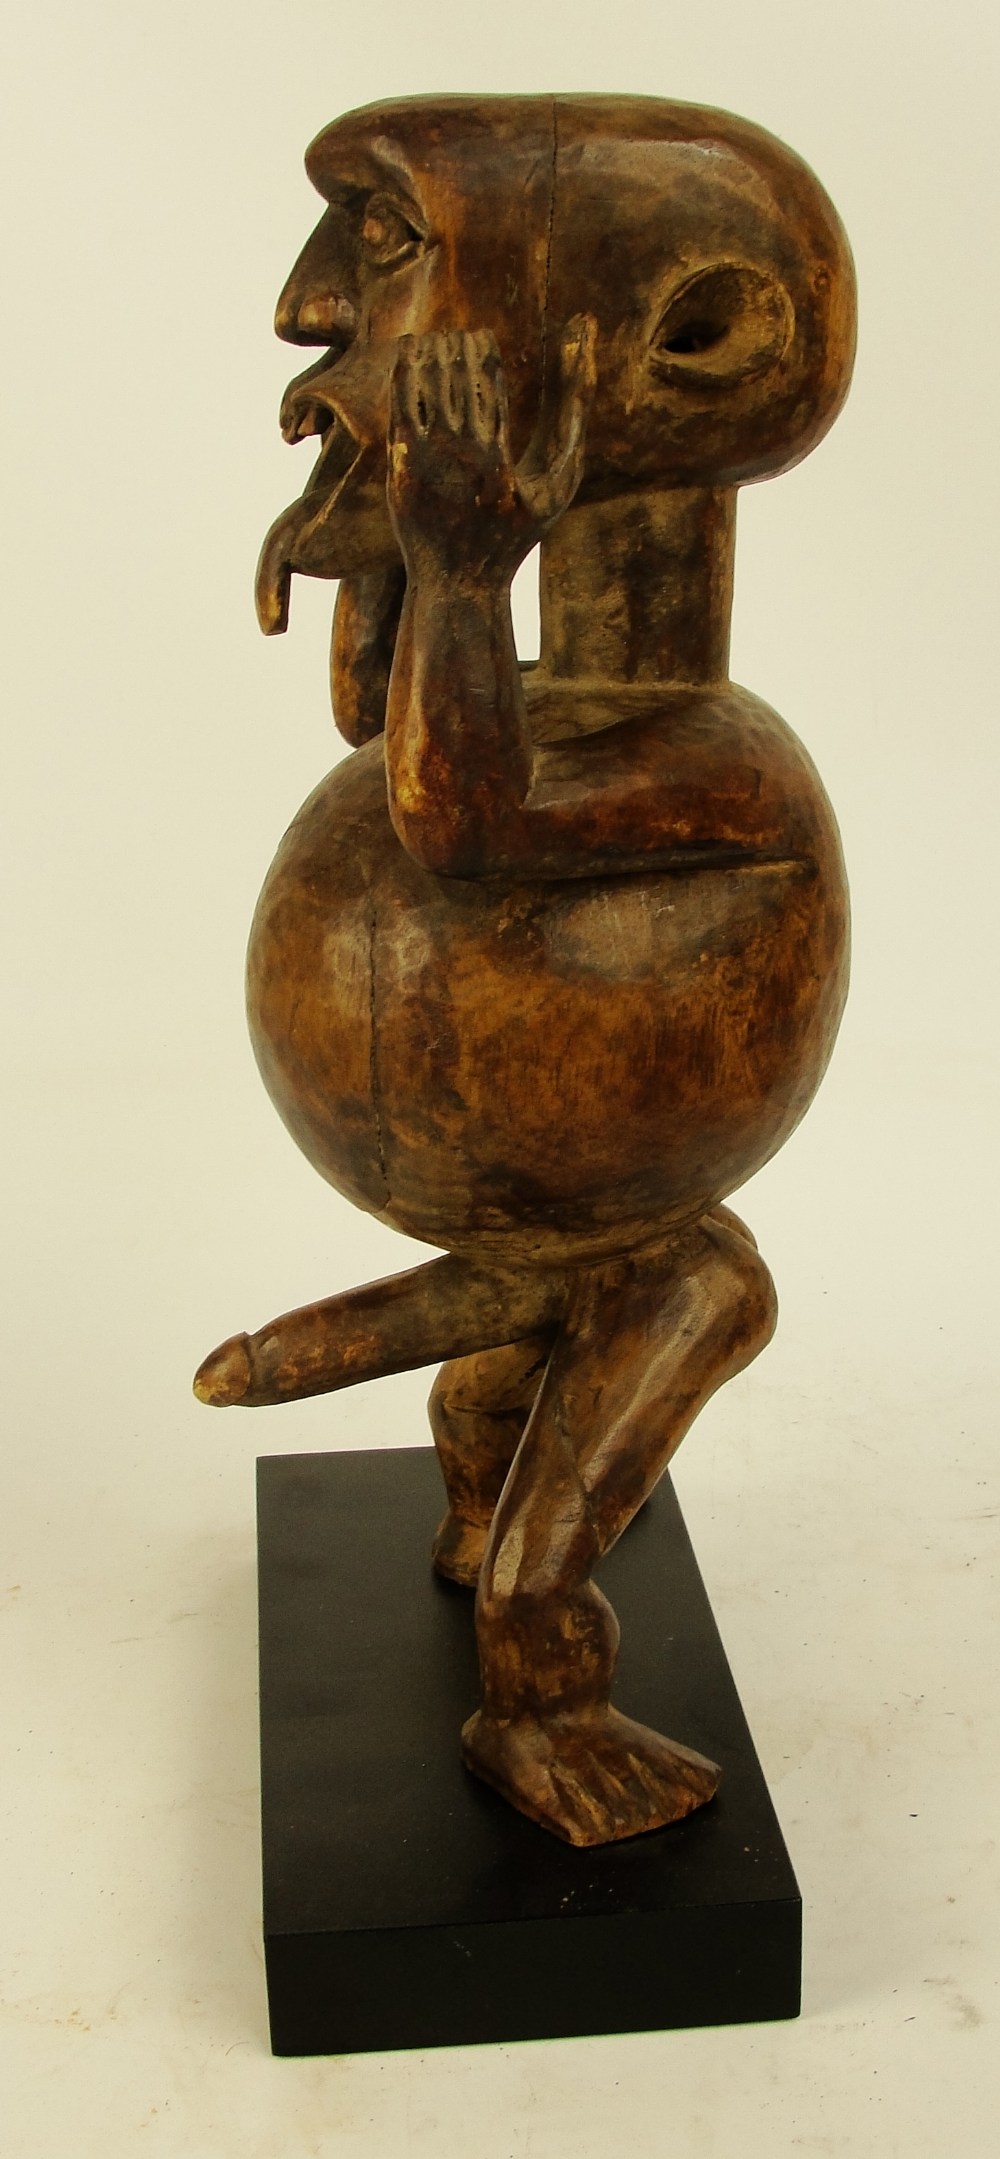 An Ibibio warning figure, Nigeria, modelled as a gent with protruding tongue, - Image 4 of 5